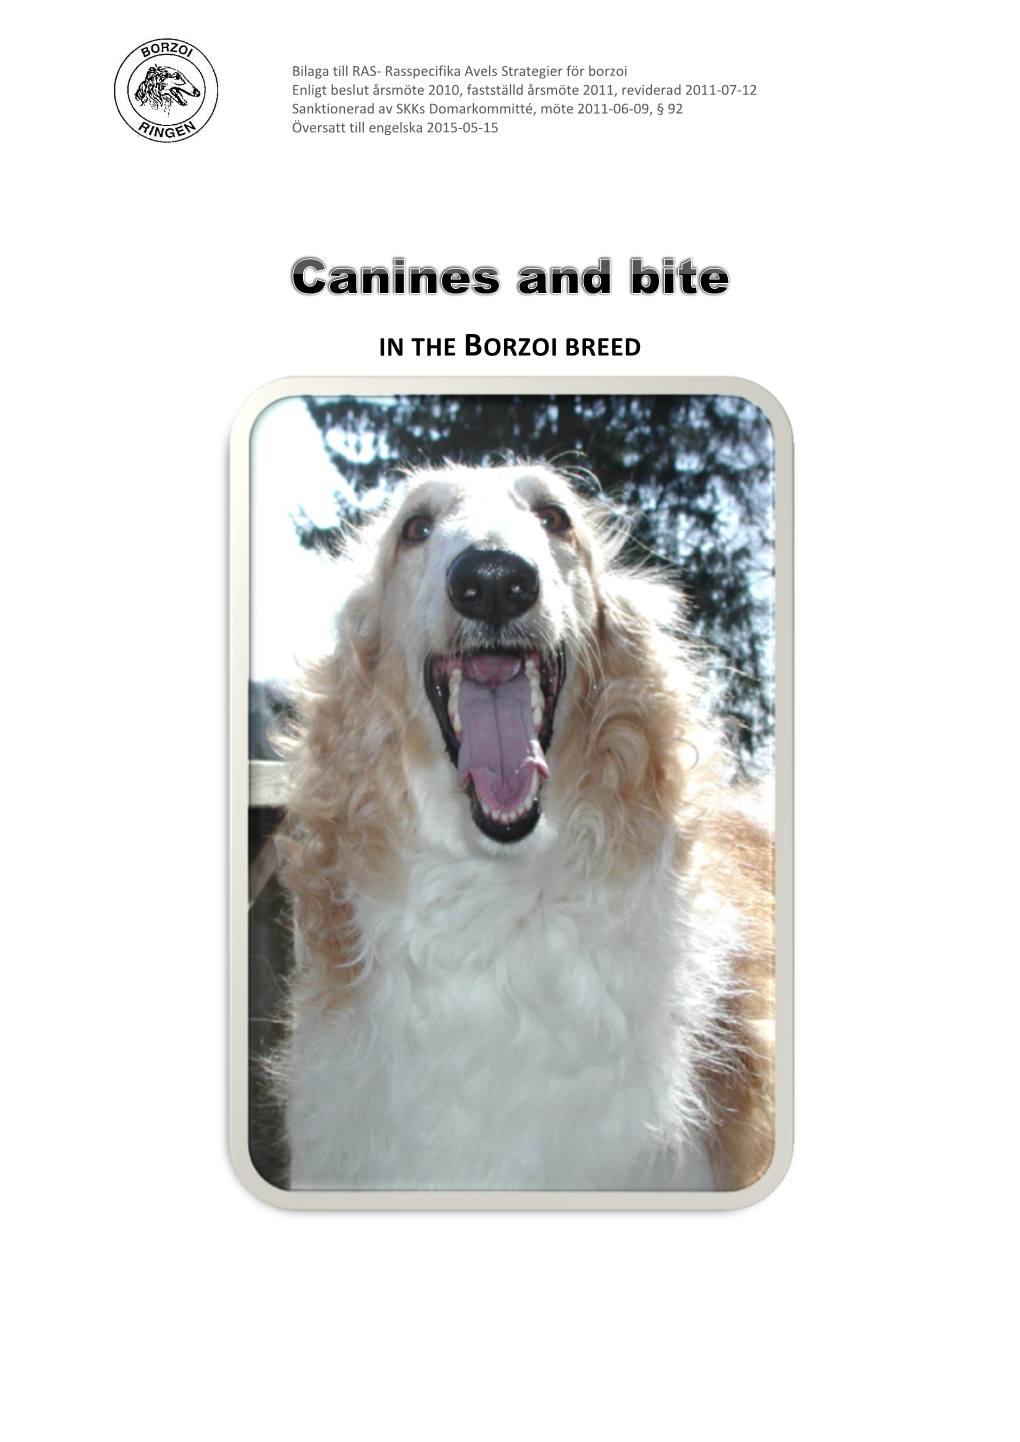 Canines and Bite in the Borzoi Breed